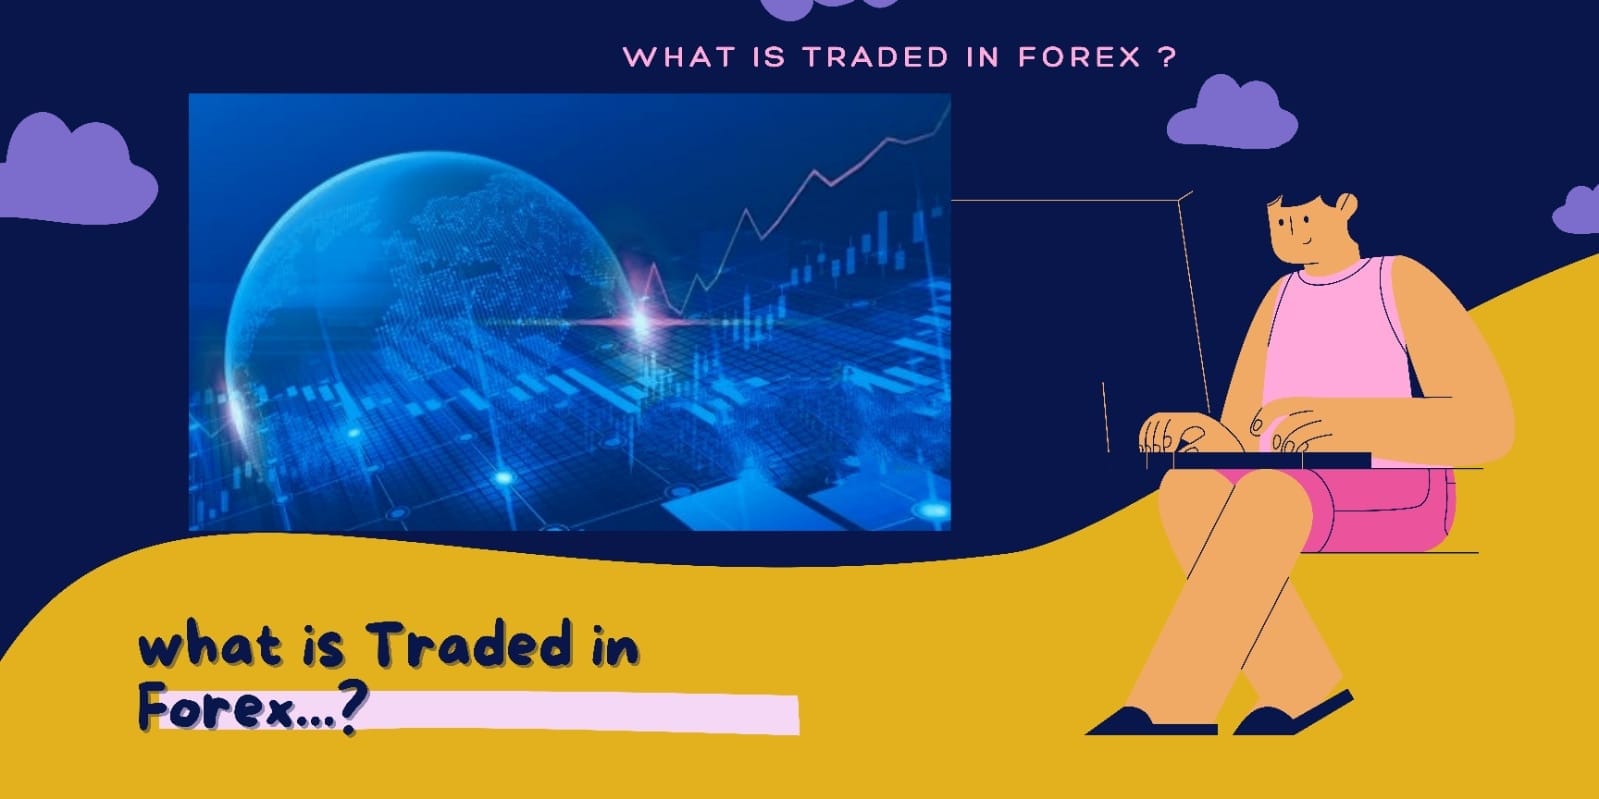 What is traded on the Foreign Exchange?